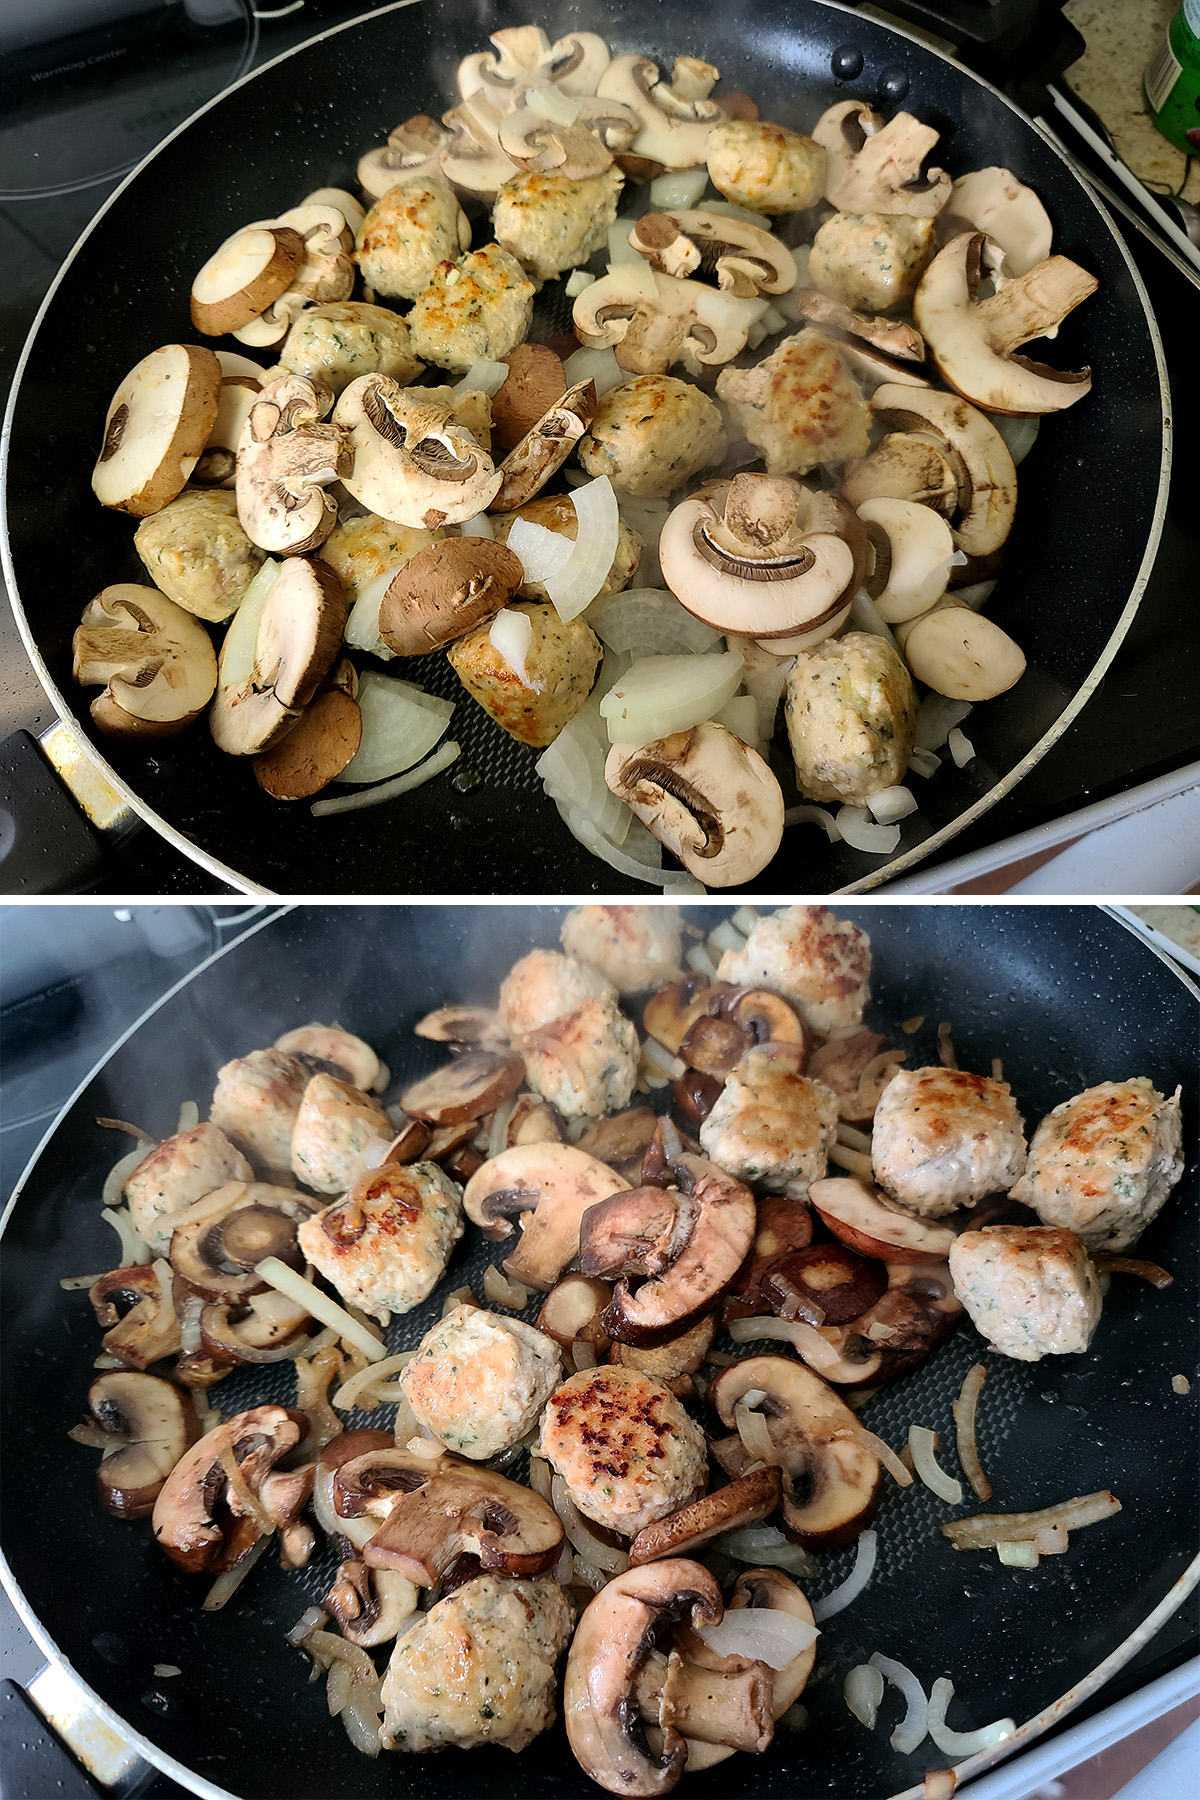 Mushrooms and onions added to the meatballs in the pan.